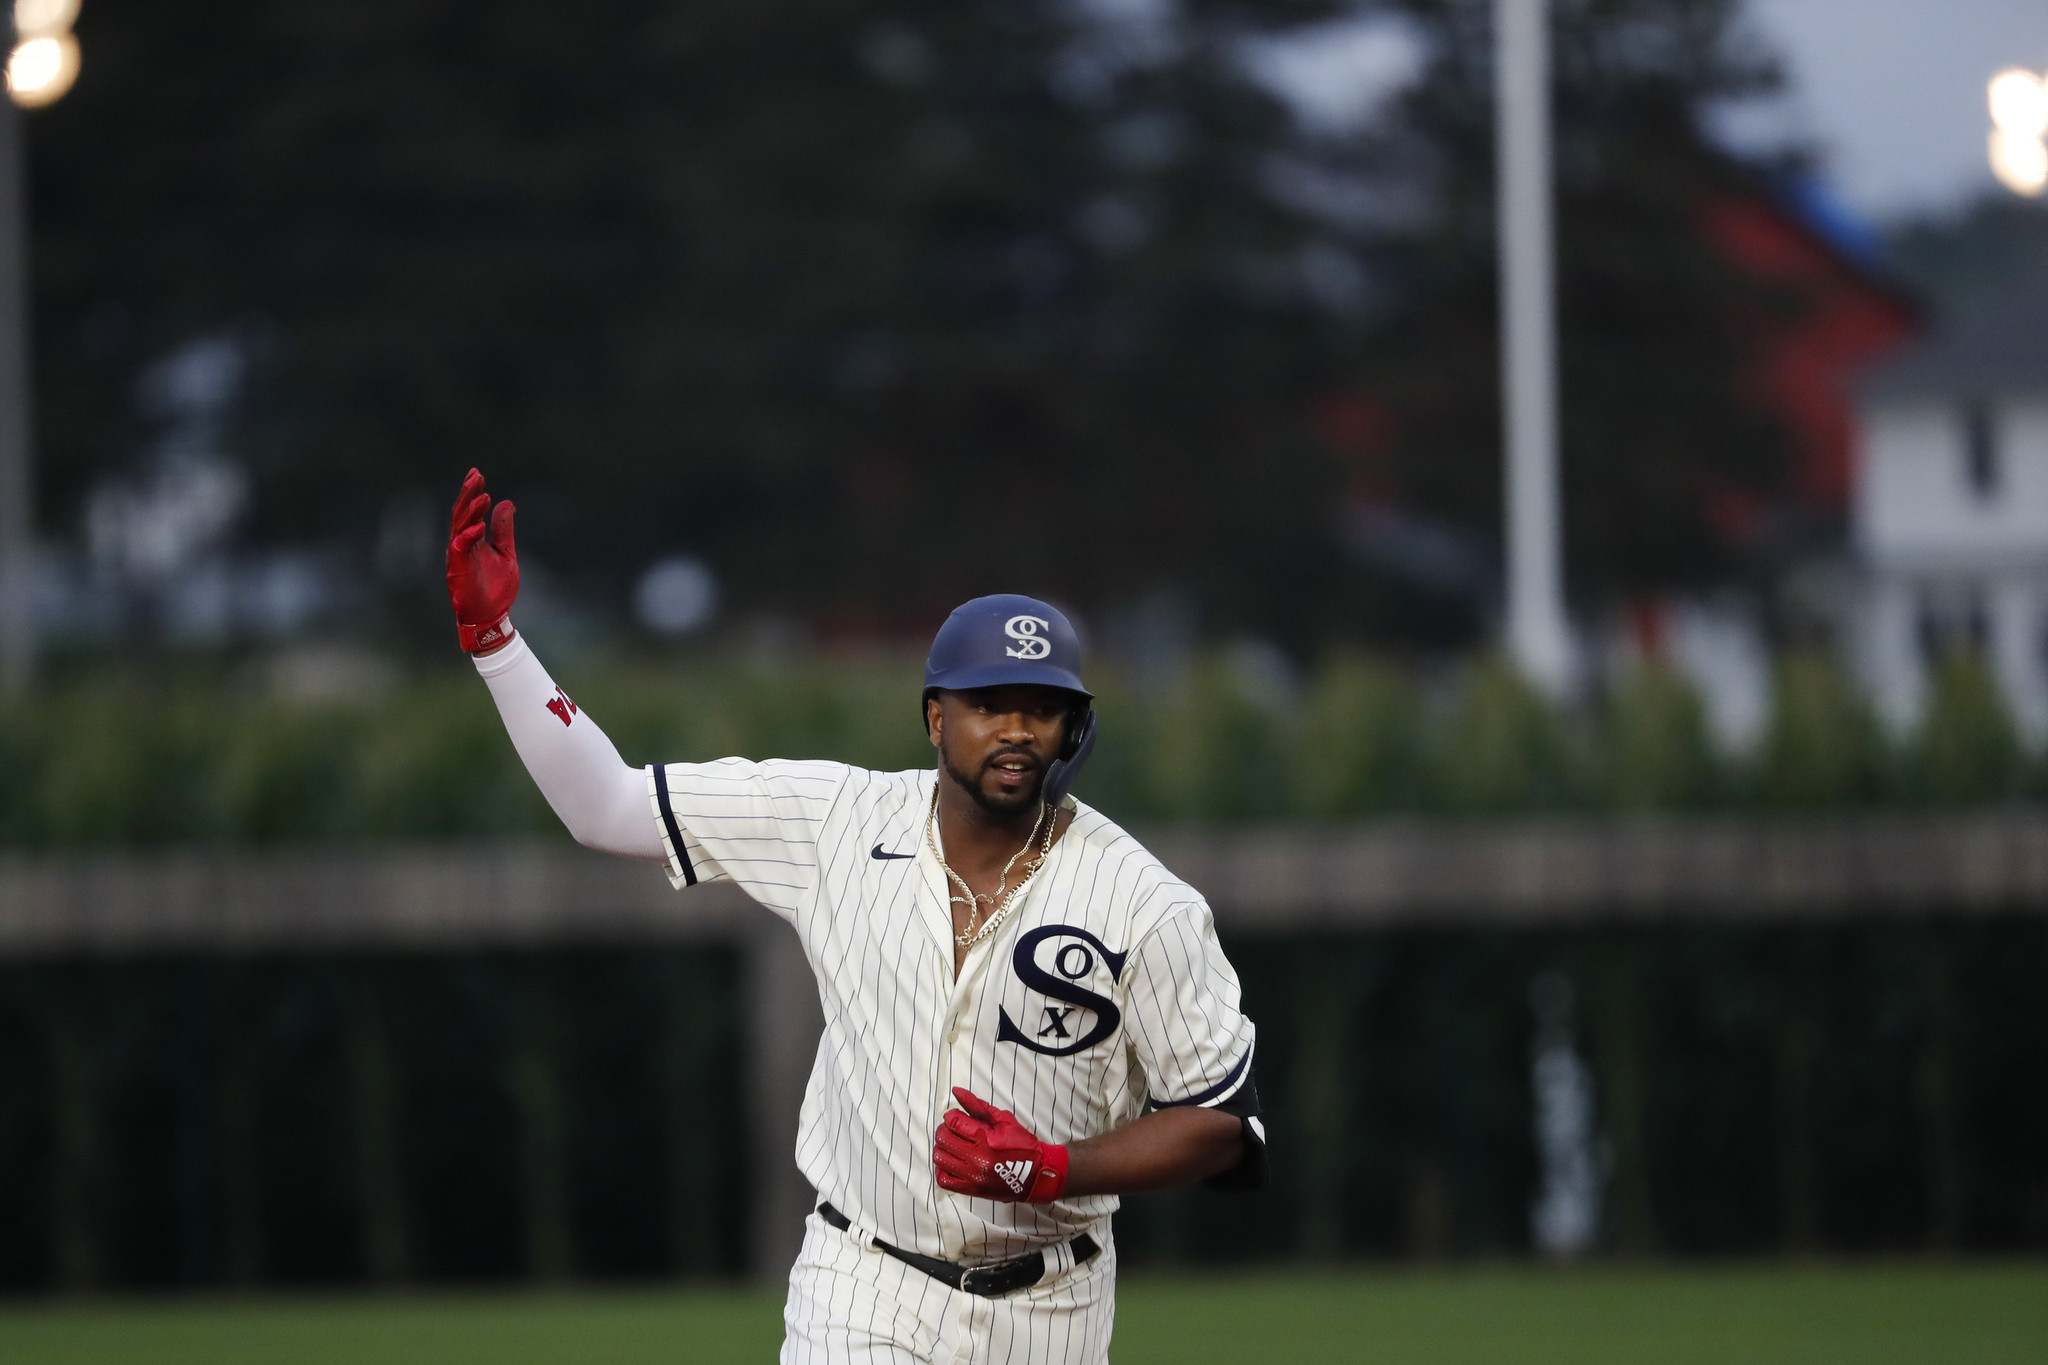 Field of Dreams game: Chicago White Sox beat New York Yankees 9-8